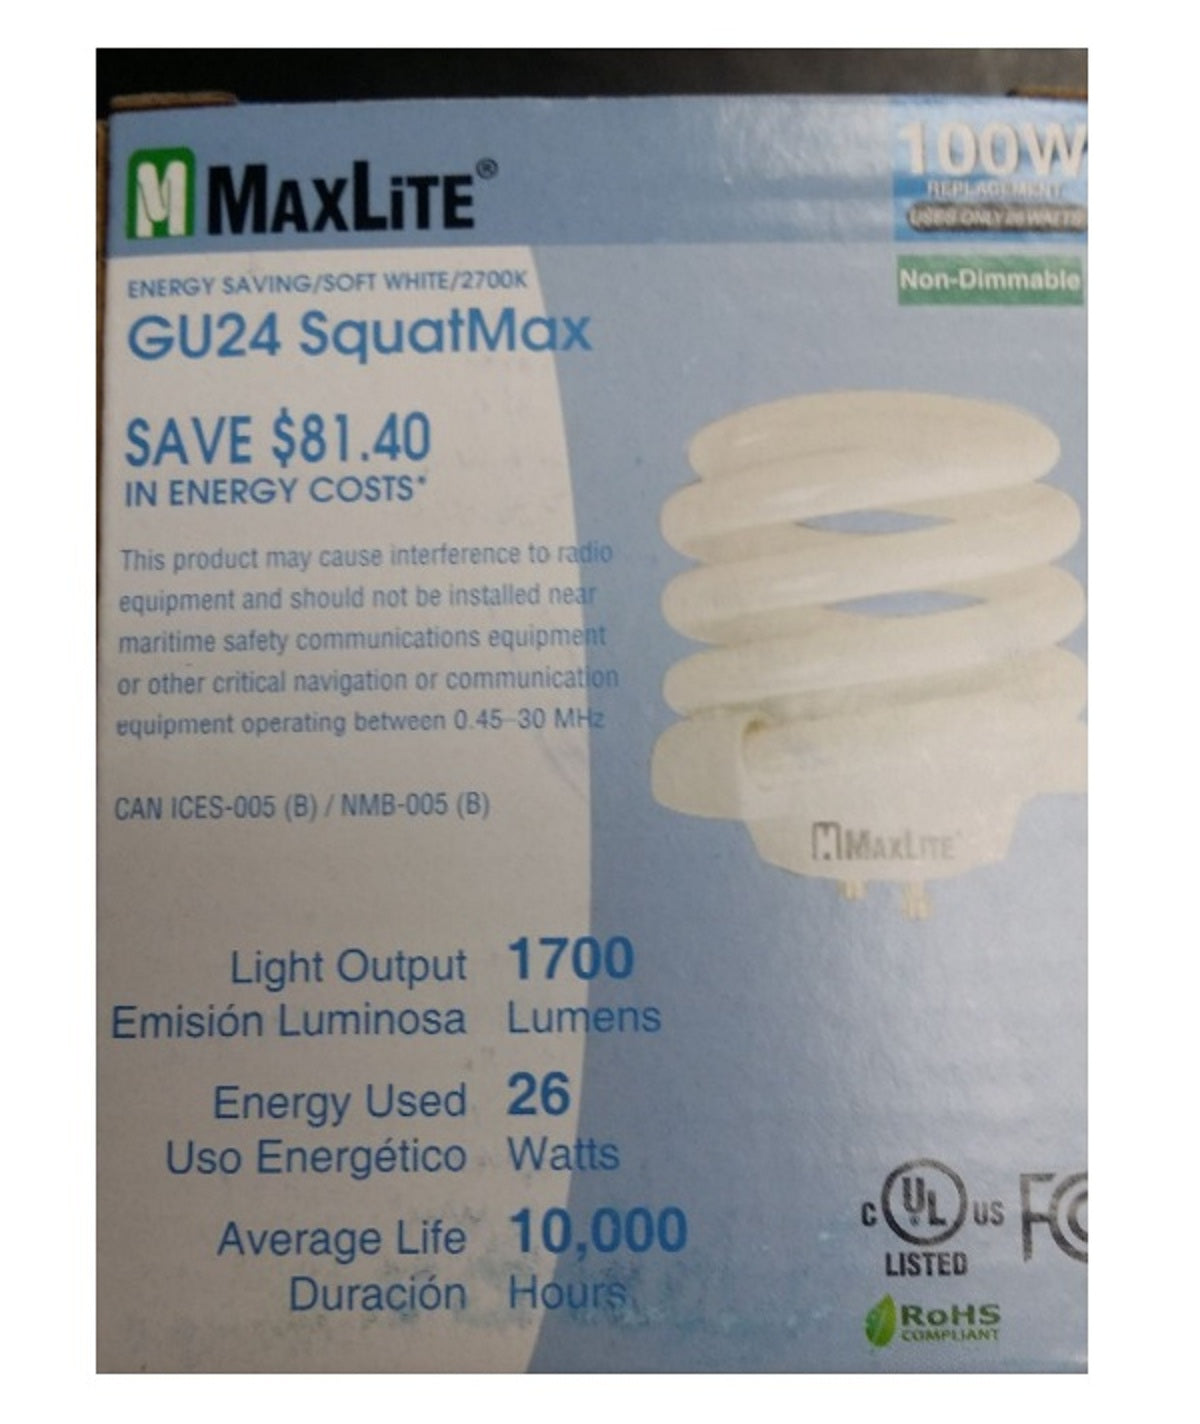 Buy maxlite gu24 squat max 2700k - Online store for lamps & light fixtures, compact fluorescent in USA, on sale, low price, discount deals, coupon code